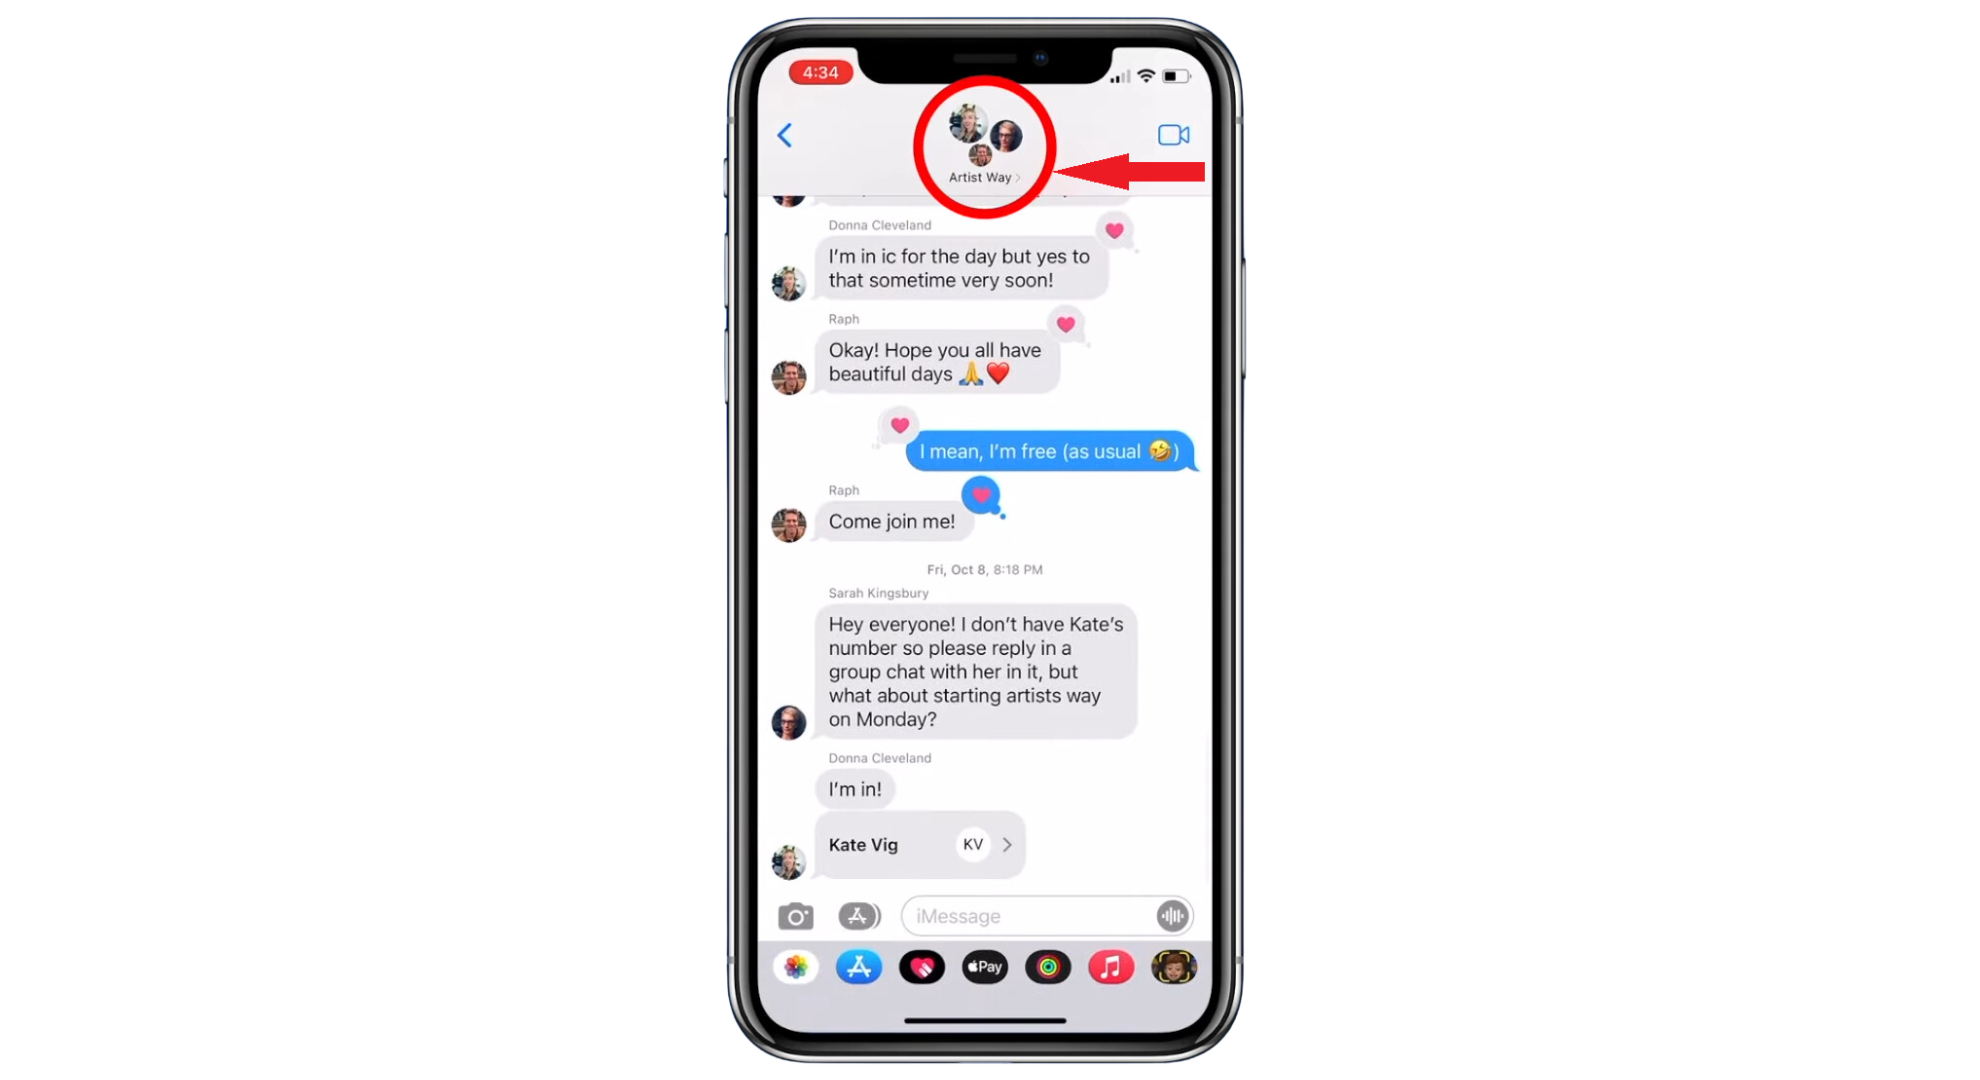 Tap on the chat icon on top